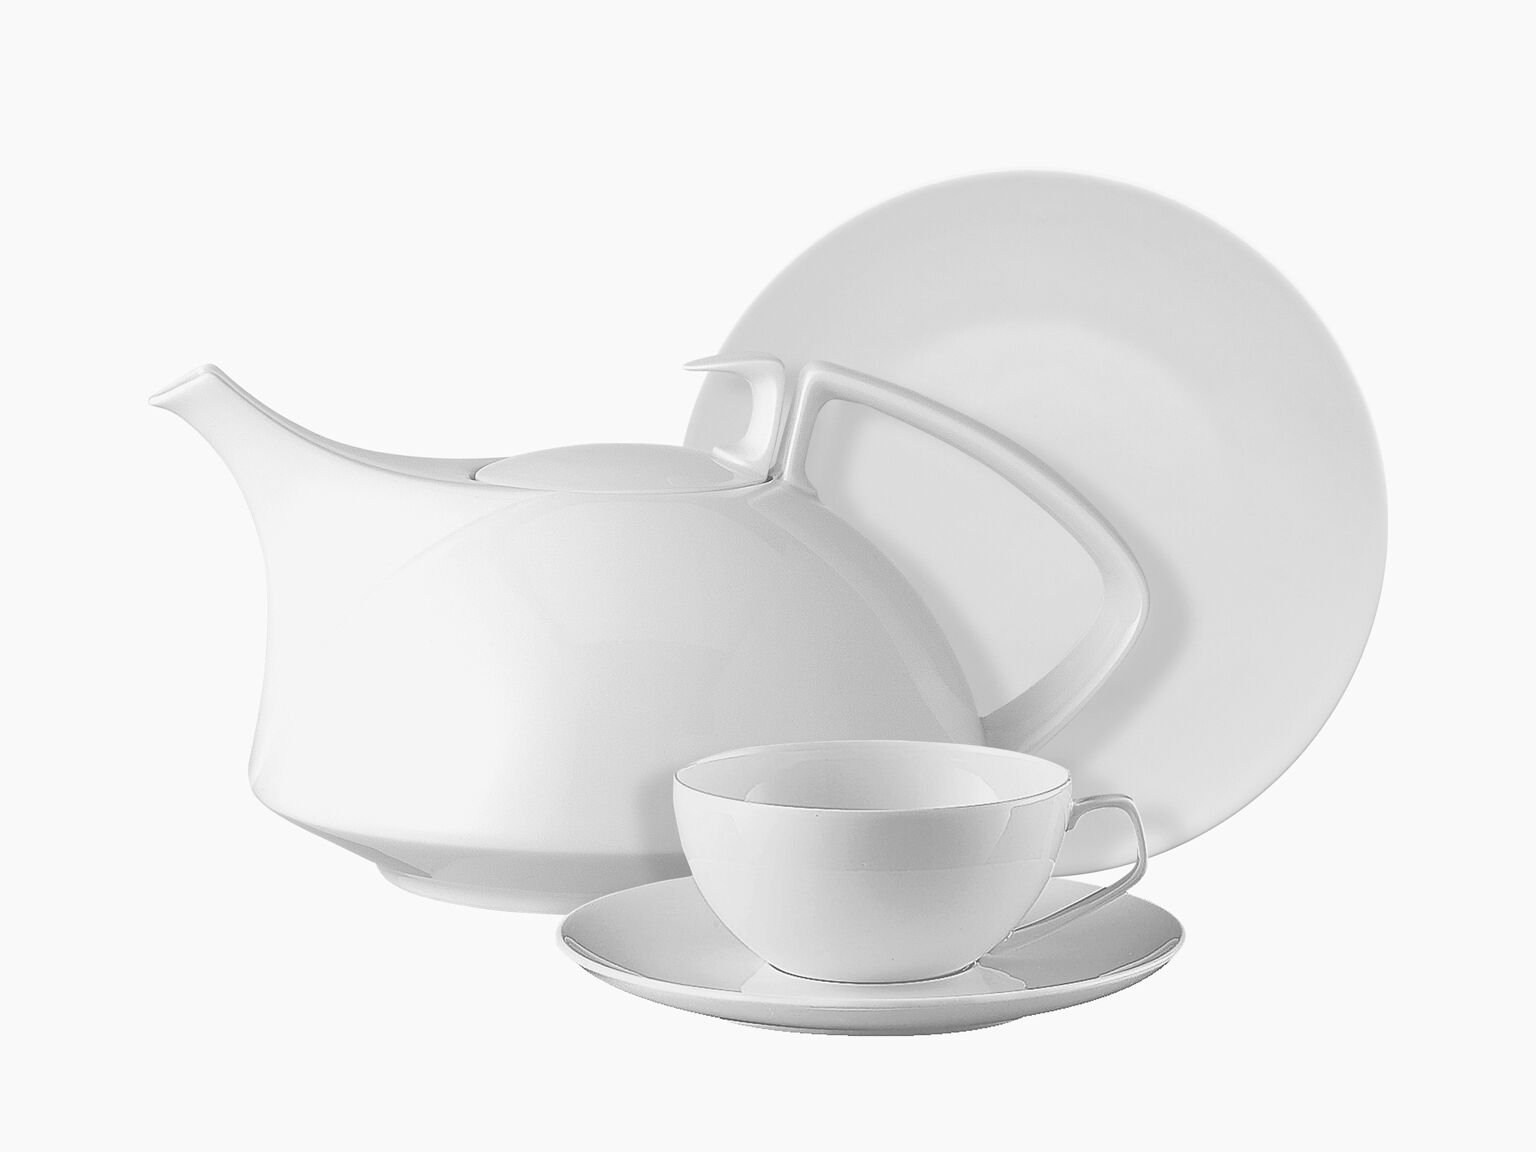 Does rosenthal china contain lead?